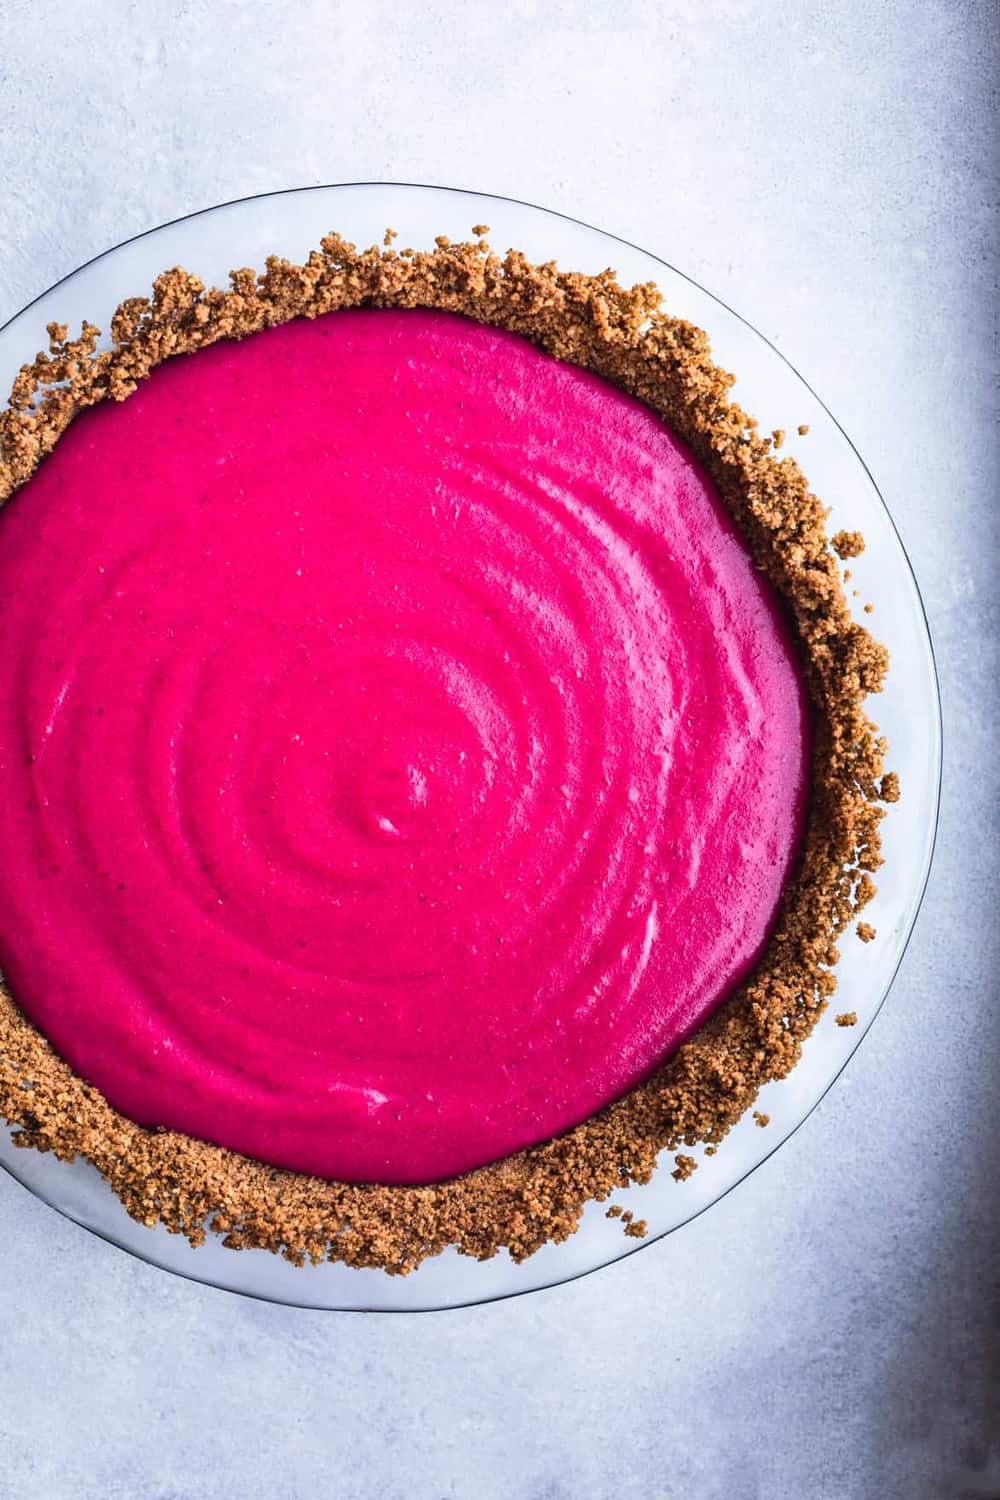 Cranberry Gingersnap Pie without any toppings. Overhead shot on a white background.